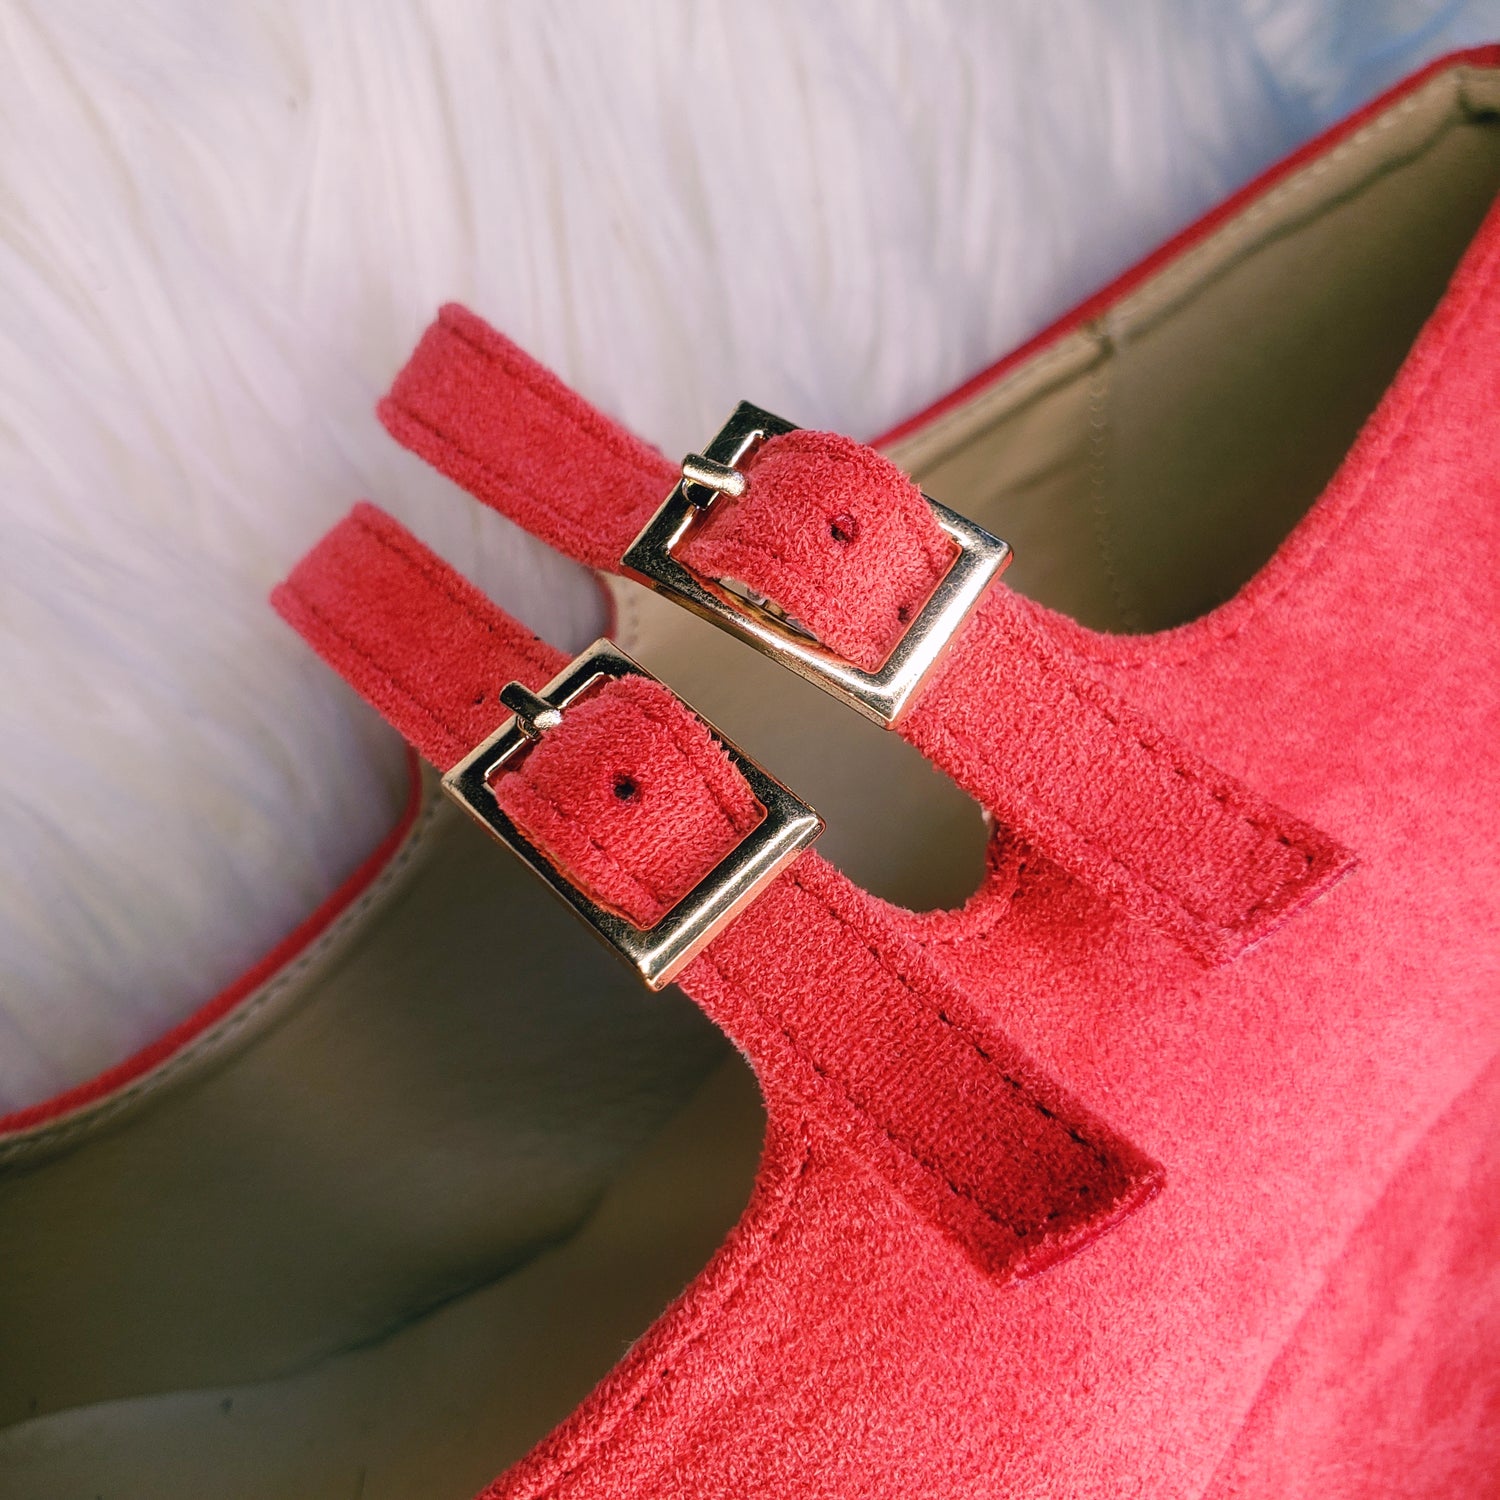 Red retro chunky platform mary jane heels. Red suede round toe platform heels inspired by the 70's. 